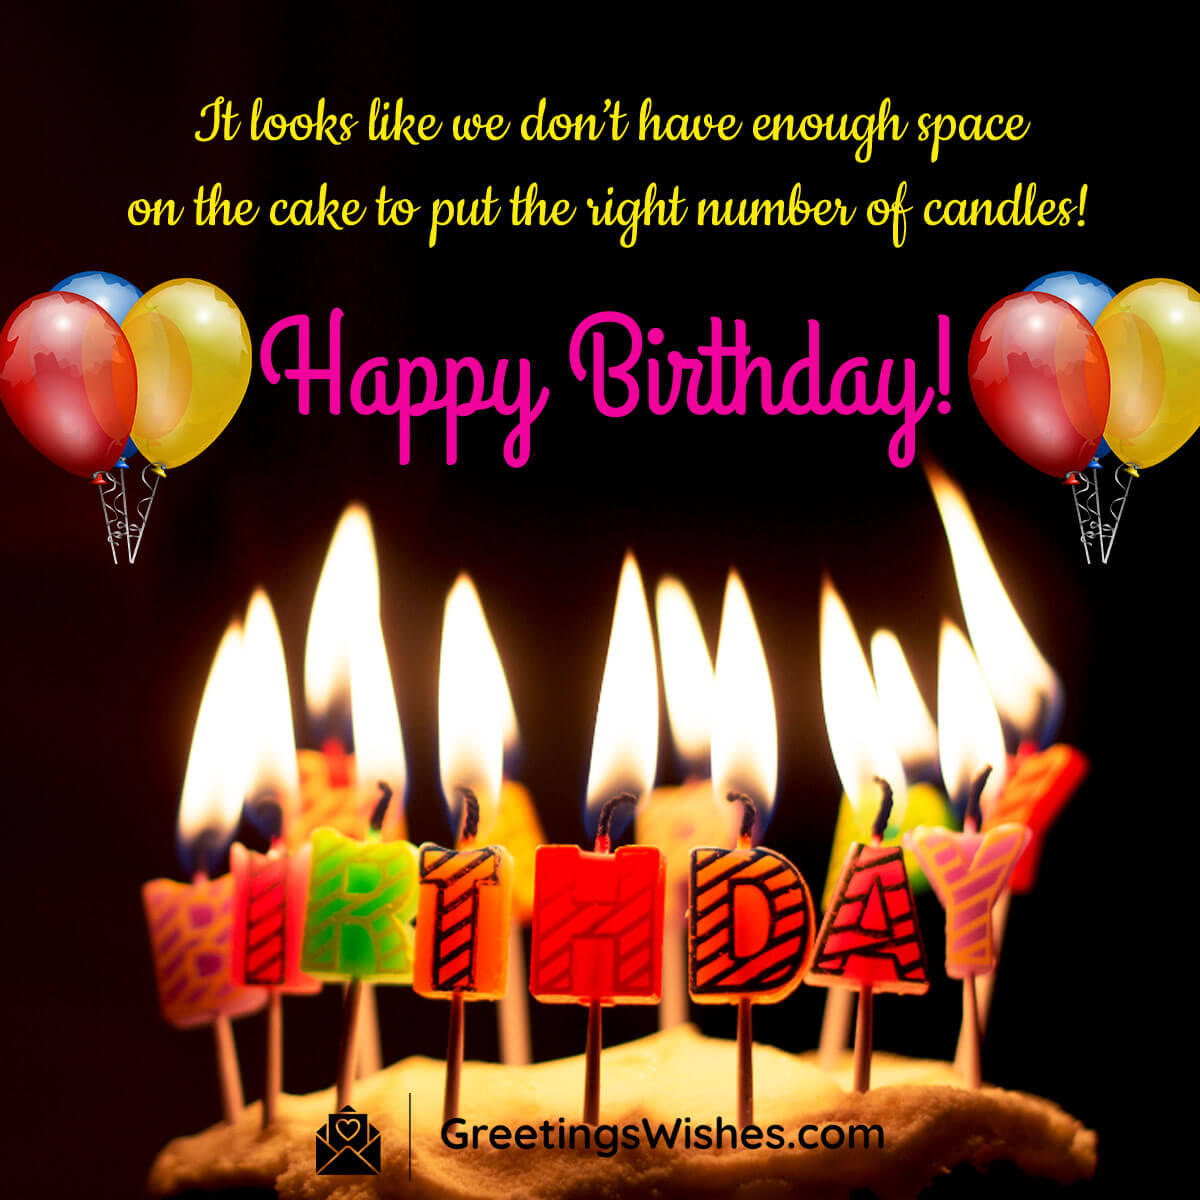 Funny Birthday Wishes - Greetings Wishes